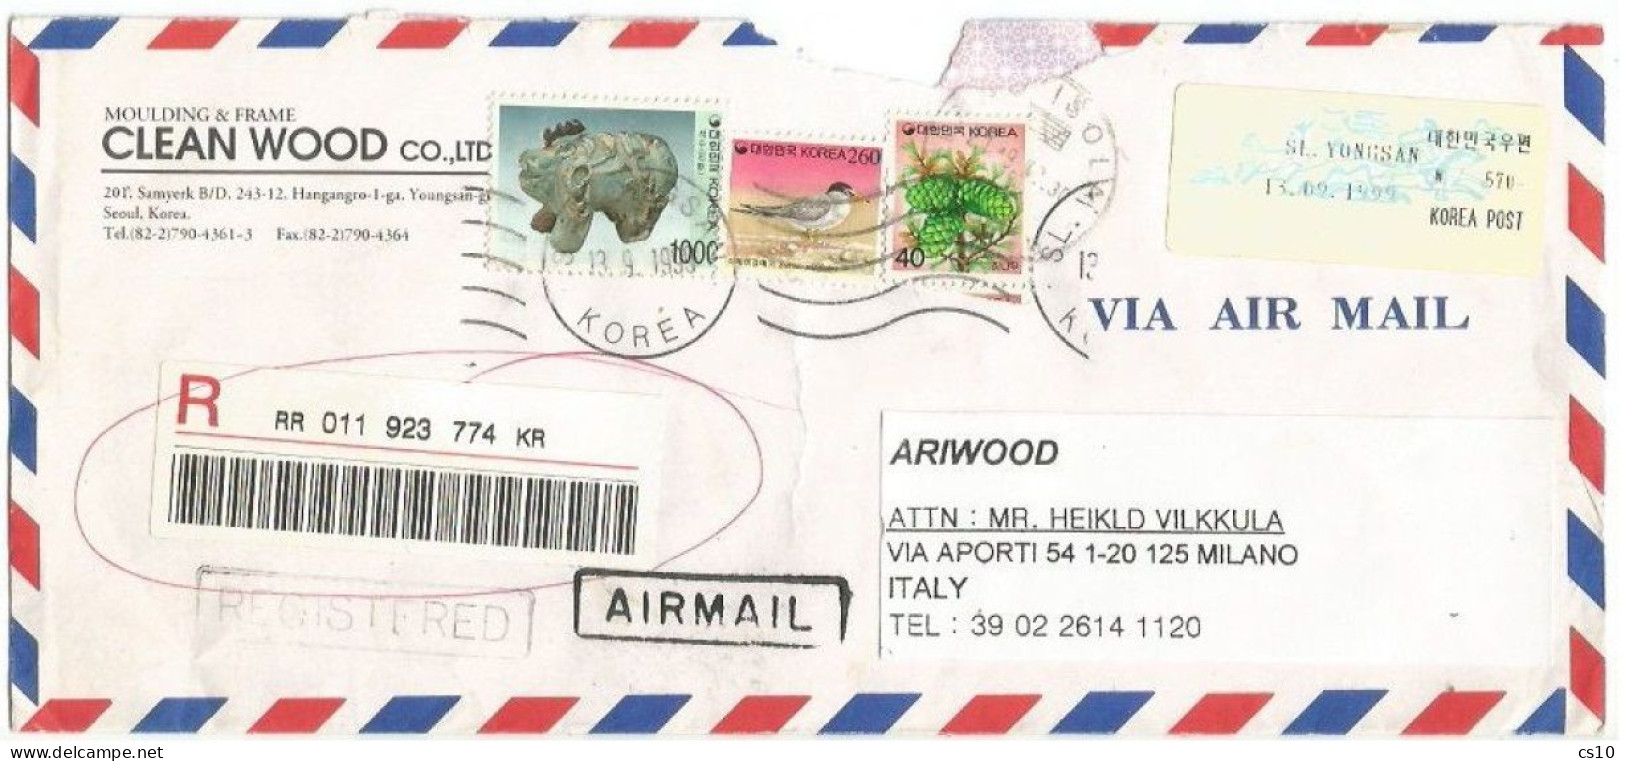 South Korea Registered Commerce Airmail Cover Youngsan 13sep1999 With FRAMA ATM Label 570w + 3 Stamps To Italy - Vignette [ATM]